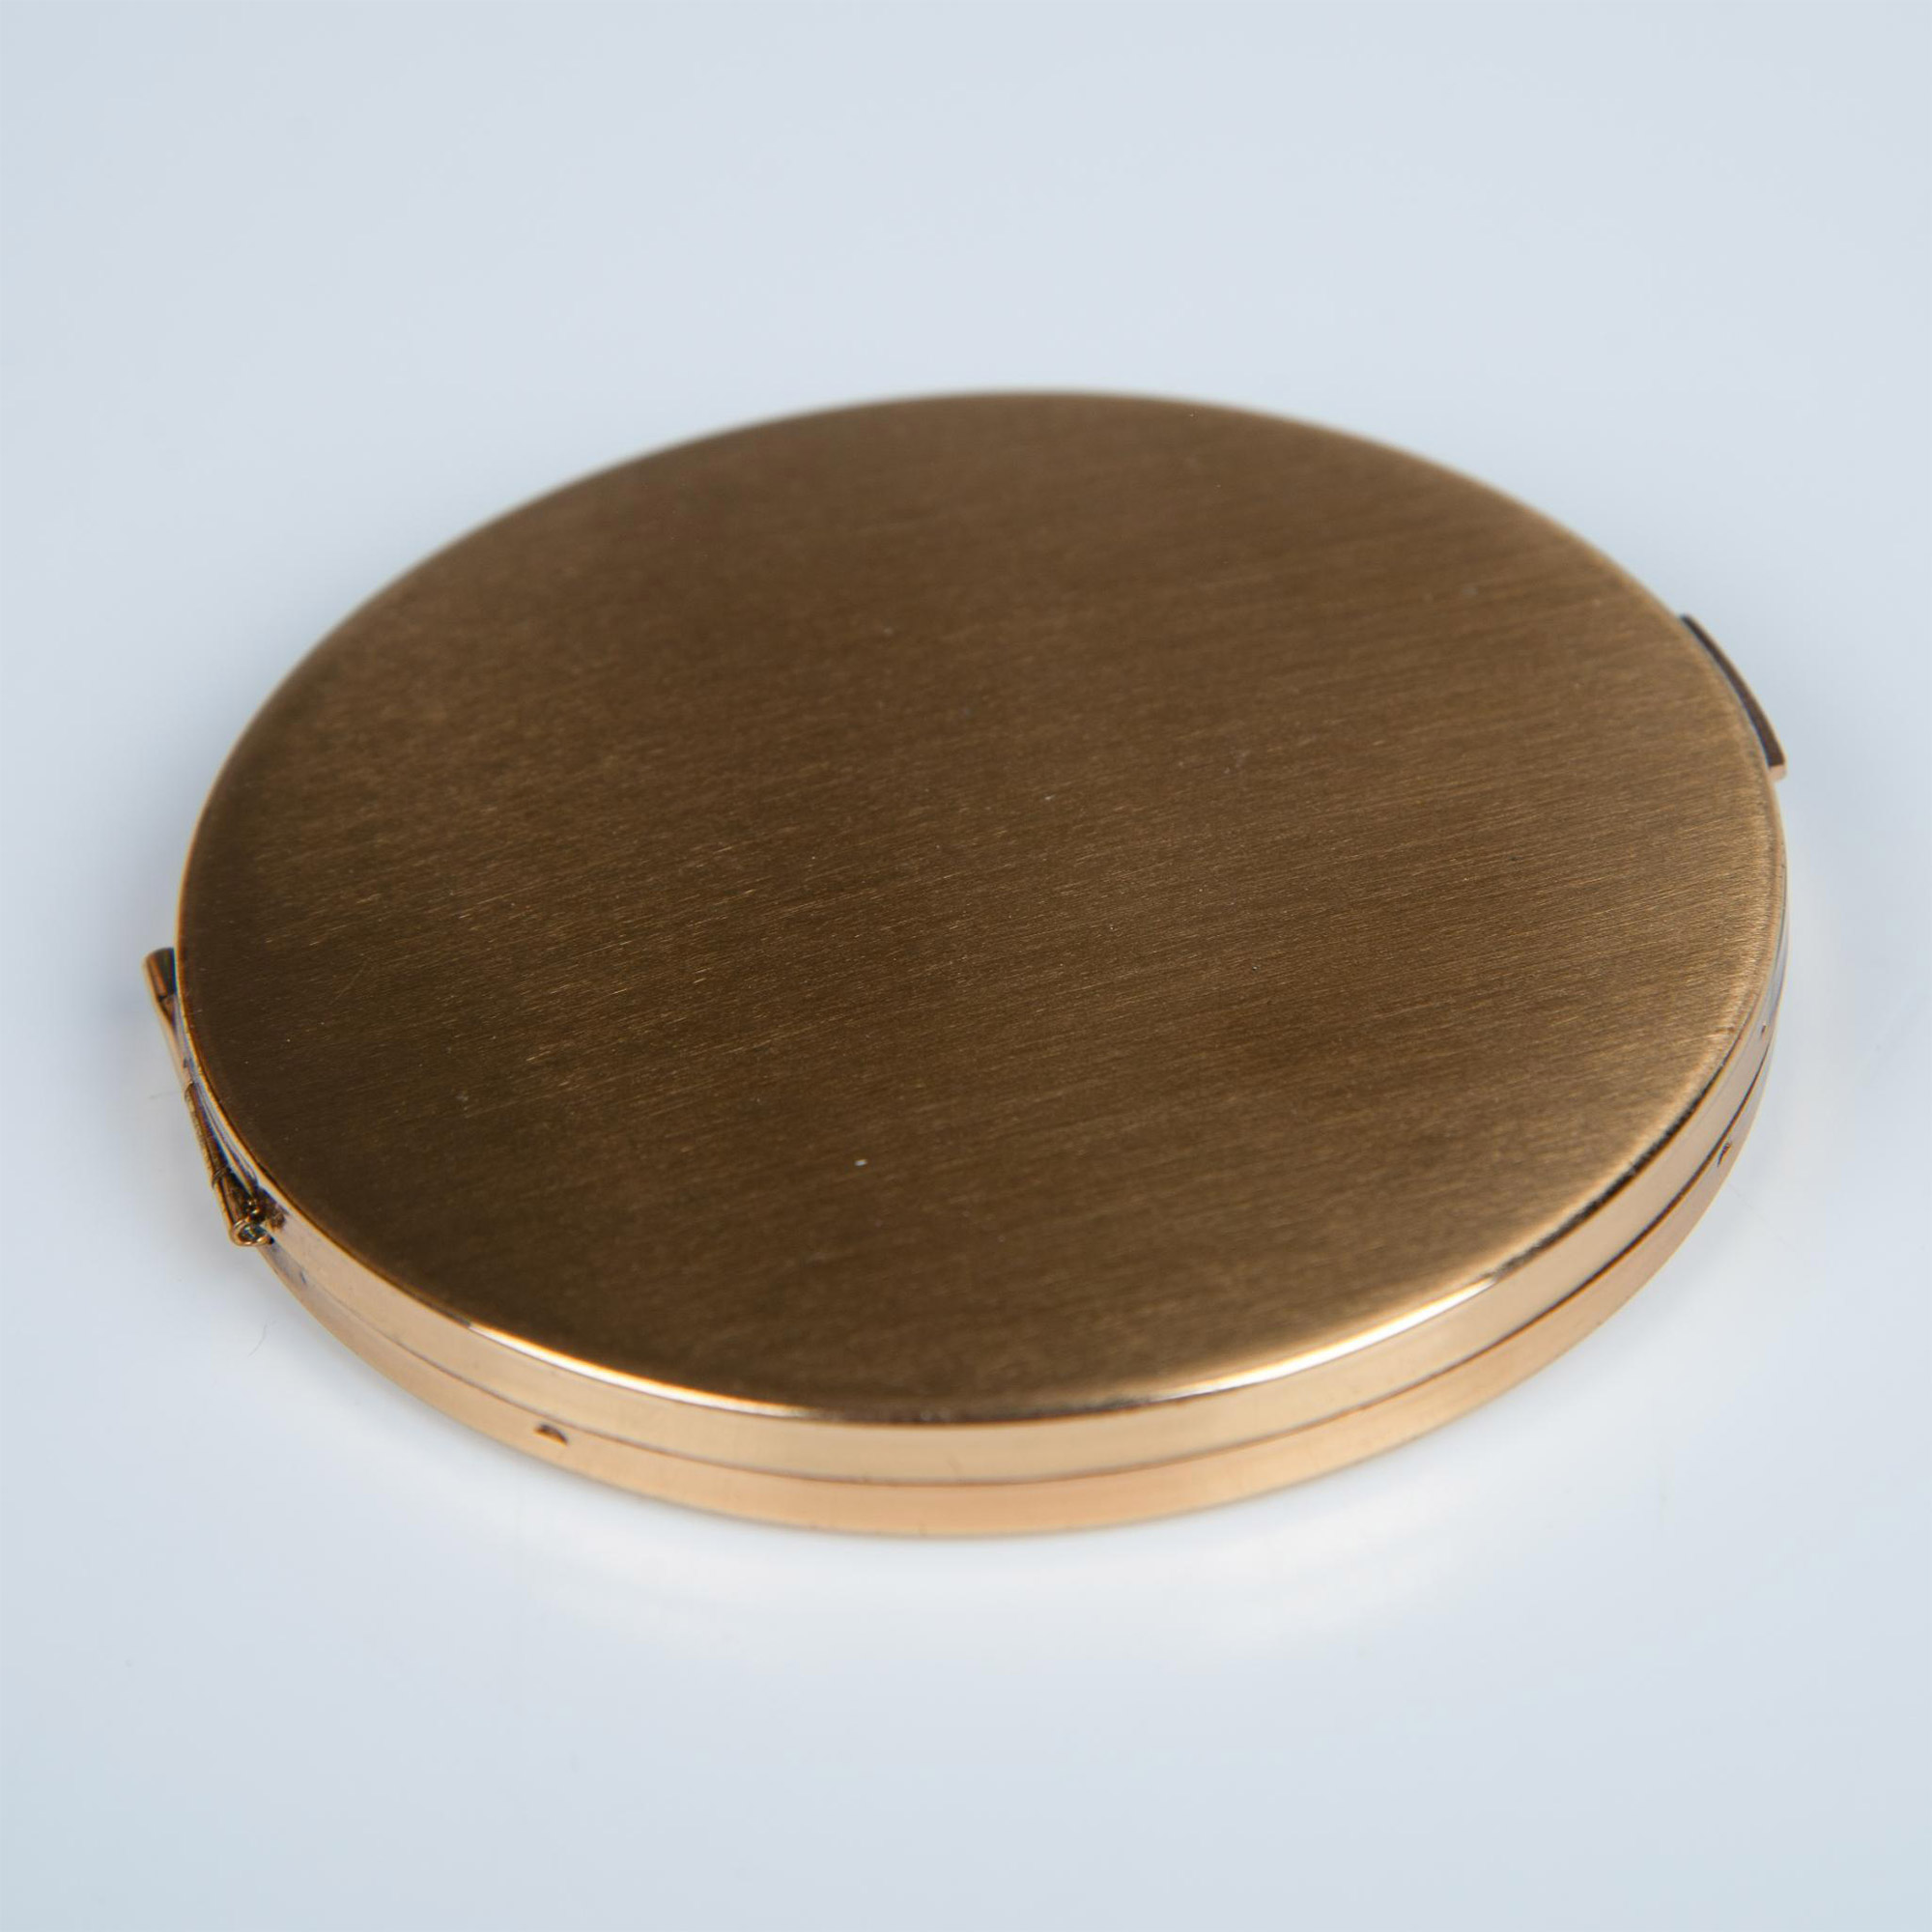 Vintage Elgin Round Etched Gold Metal Compact & Puff - Image 3 of 5